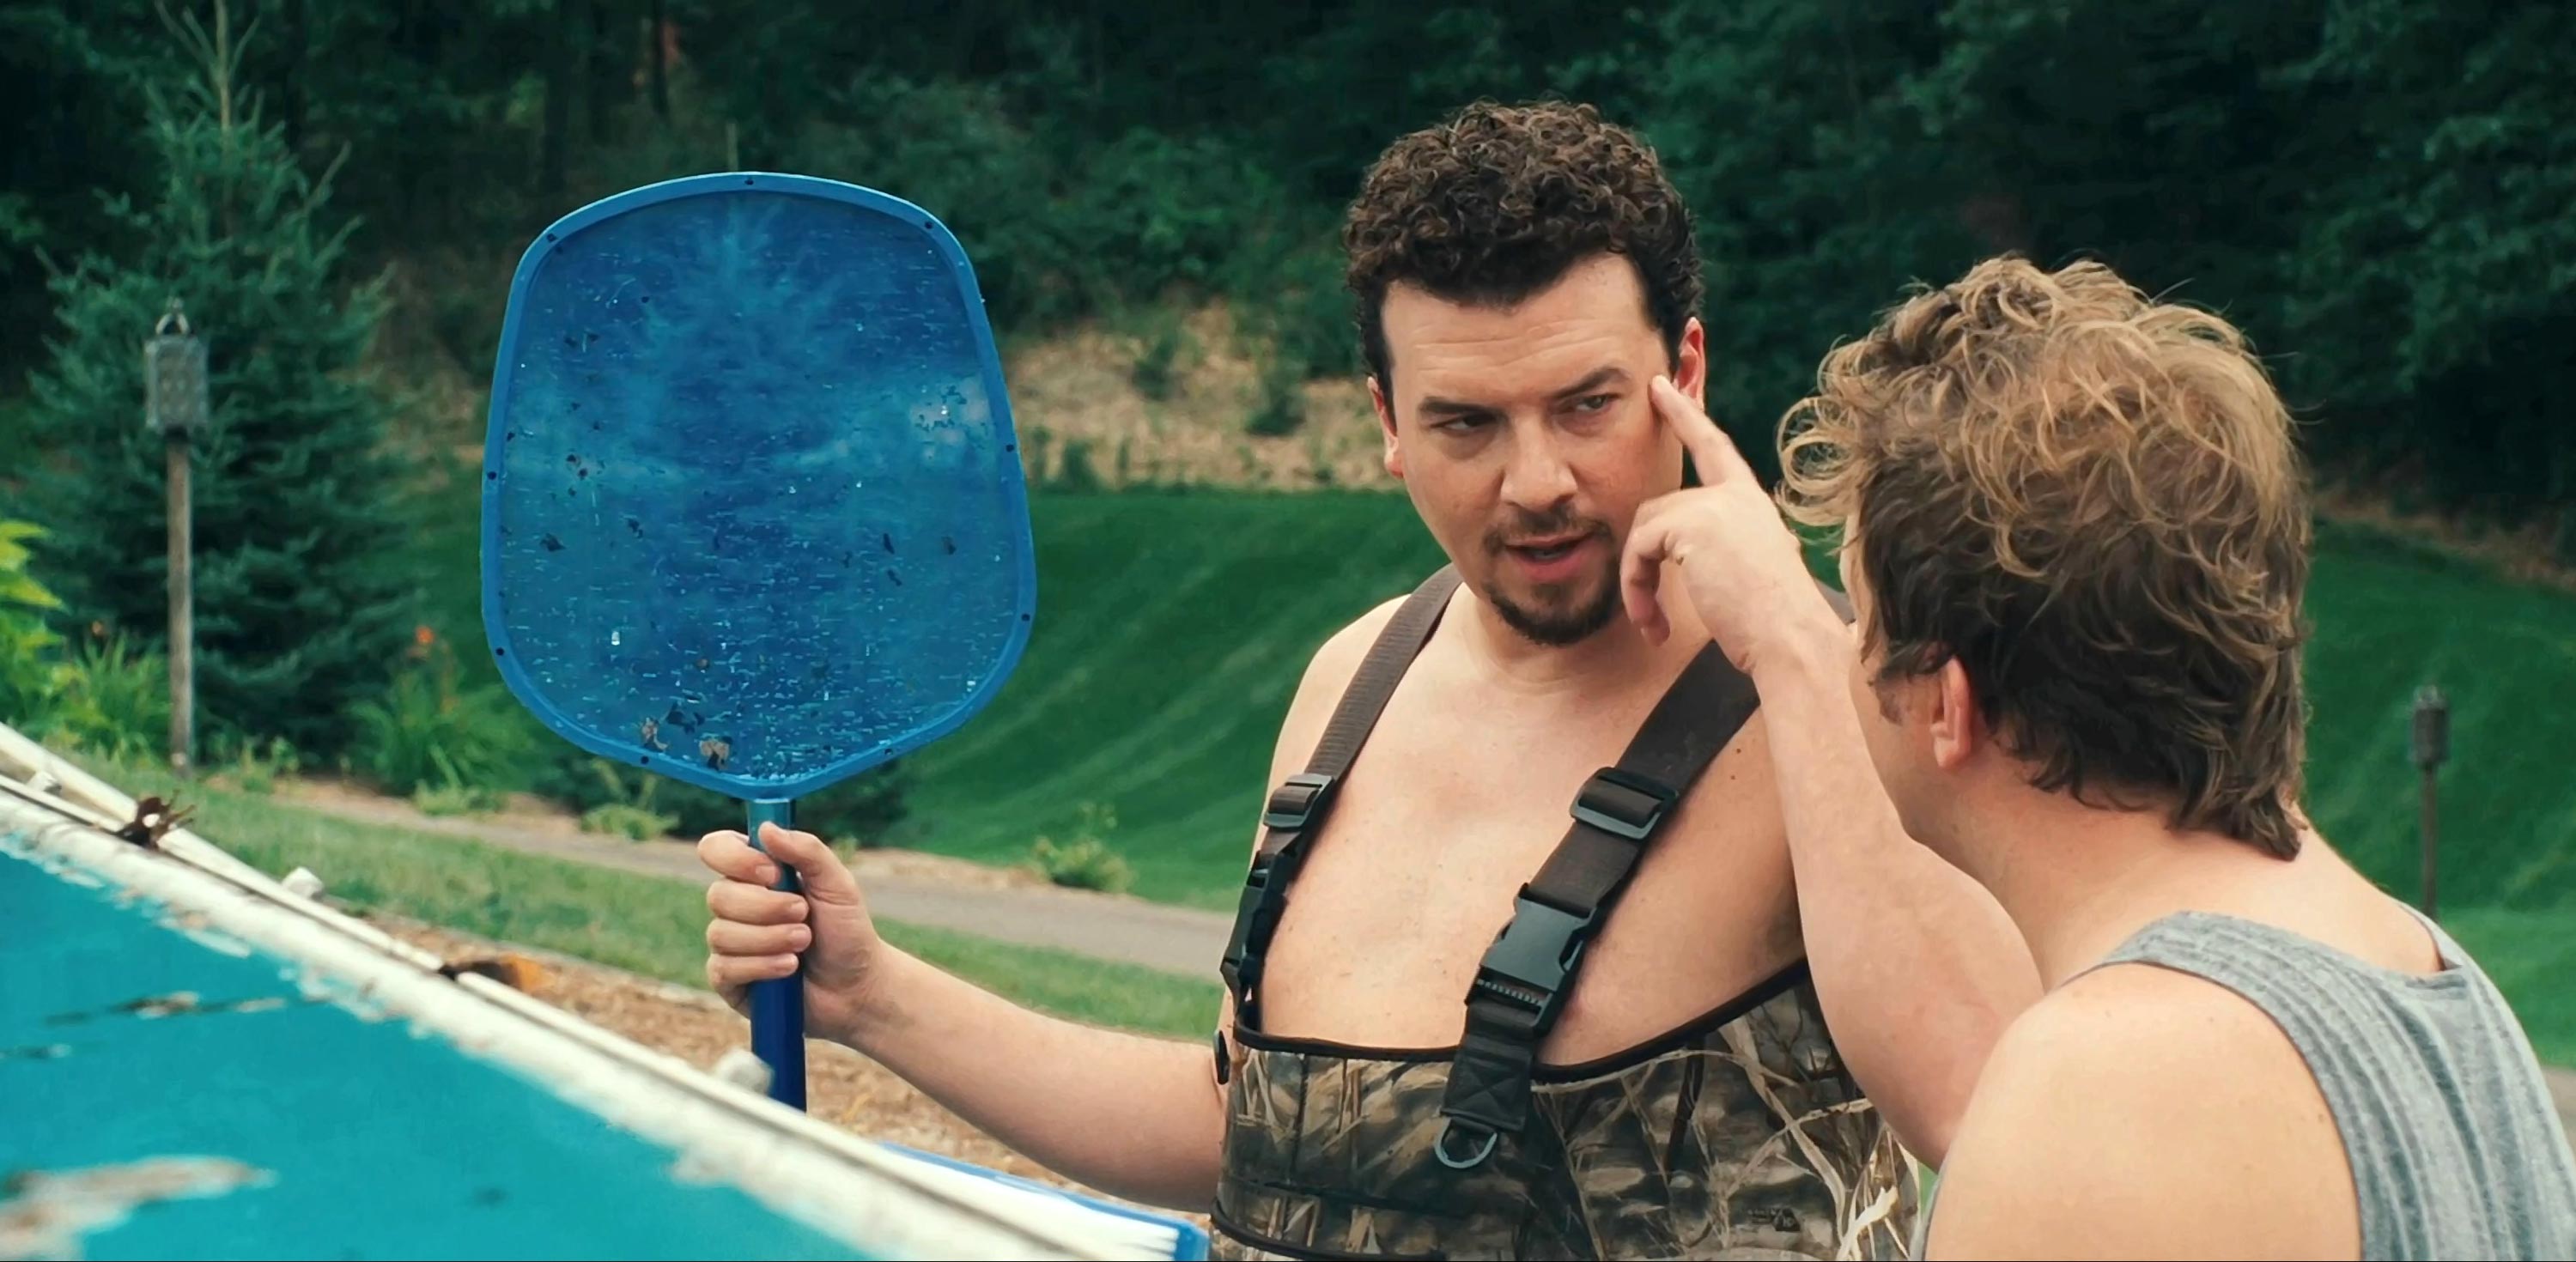 Nick Swardson and Danny McBride in 30 Minutes or Less